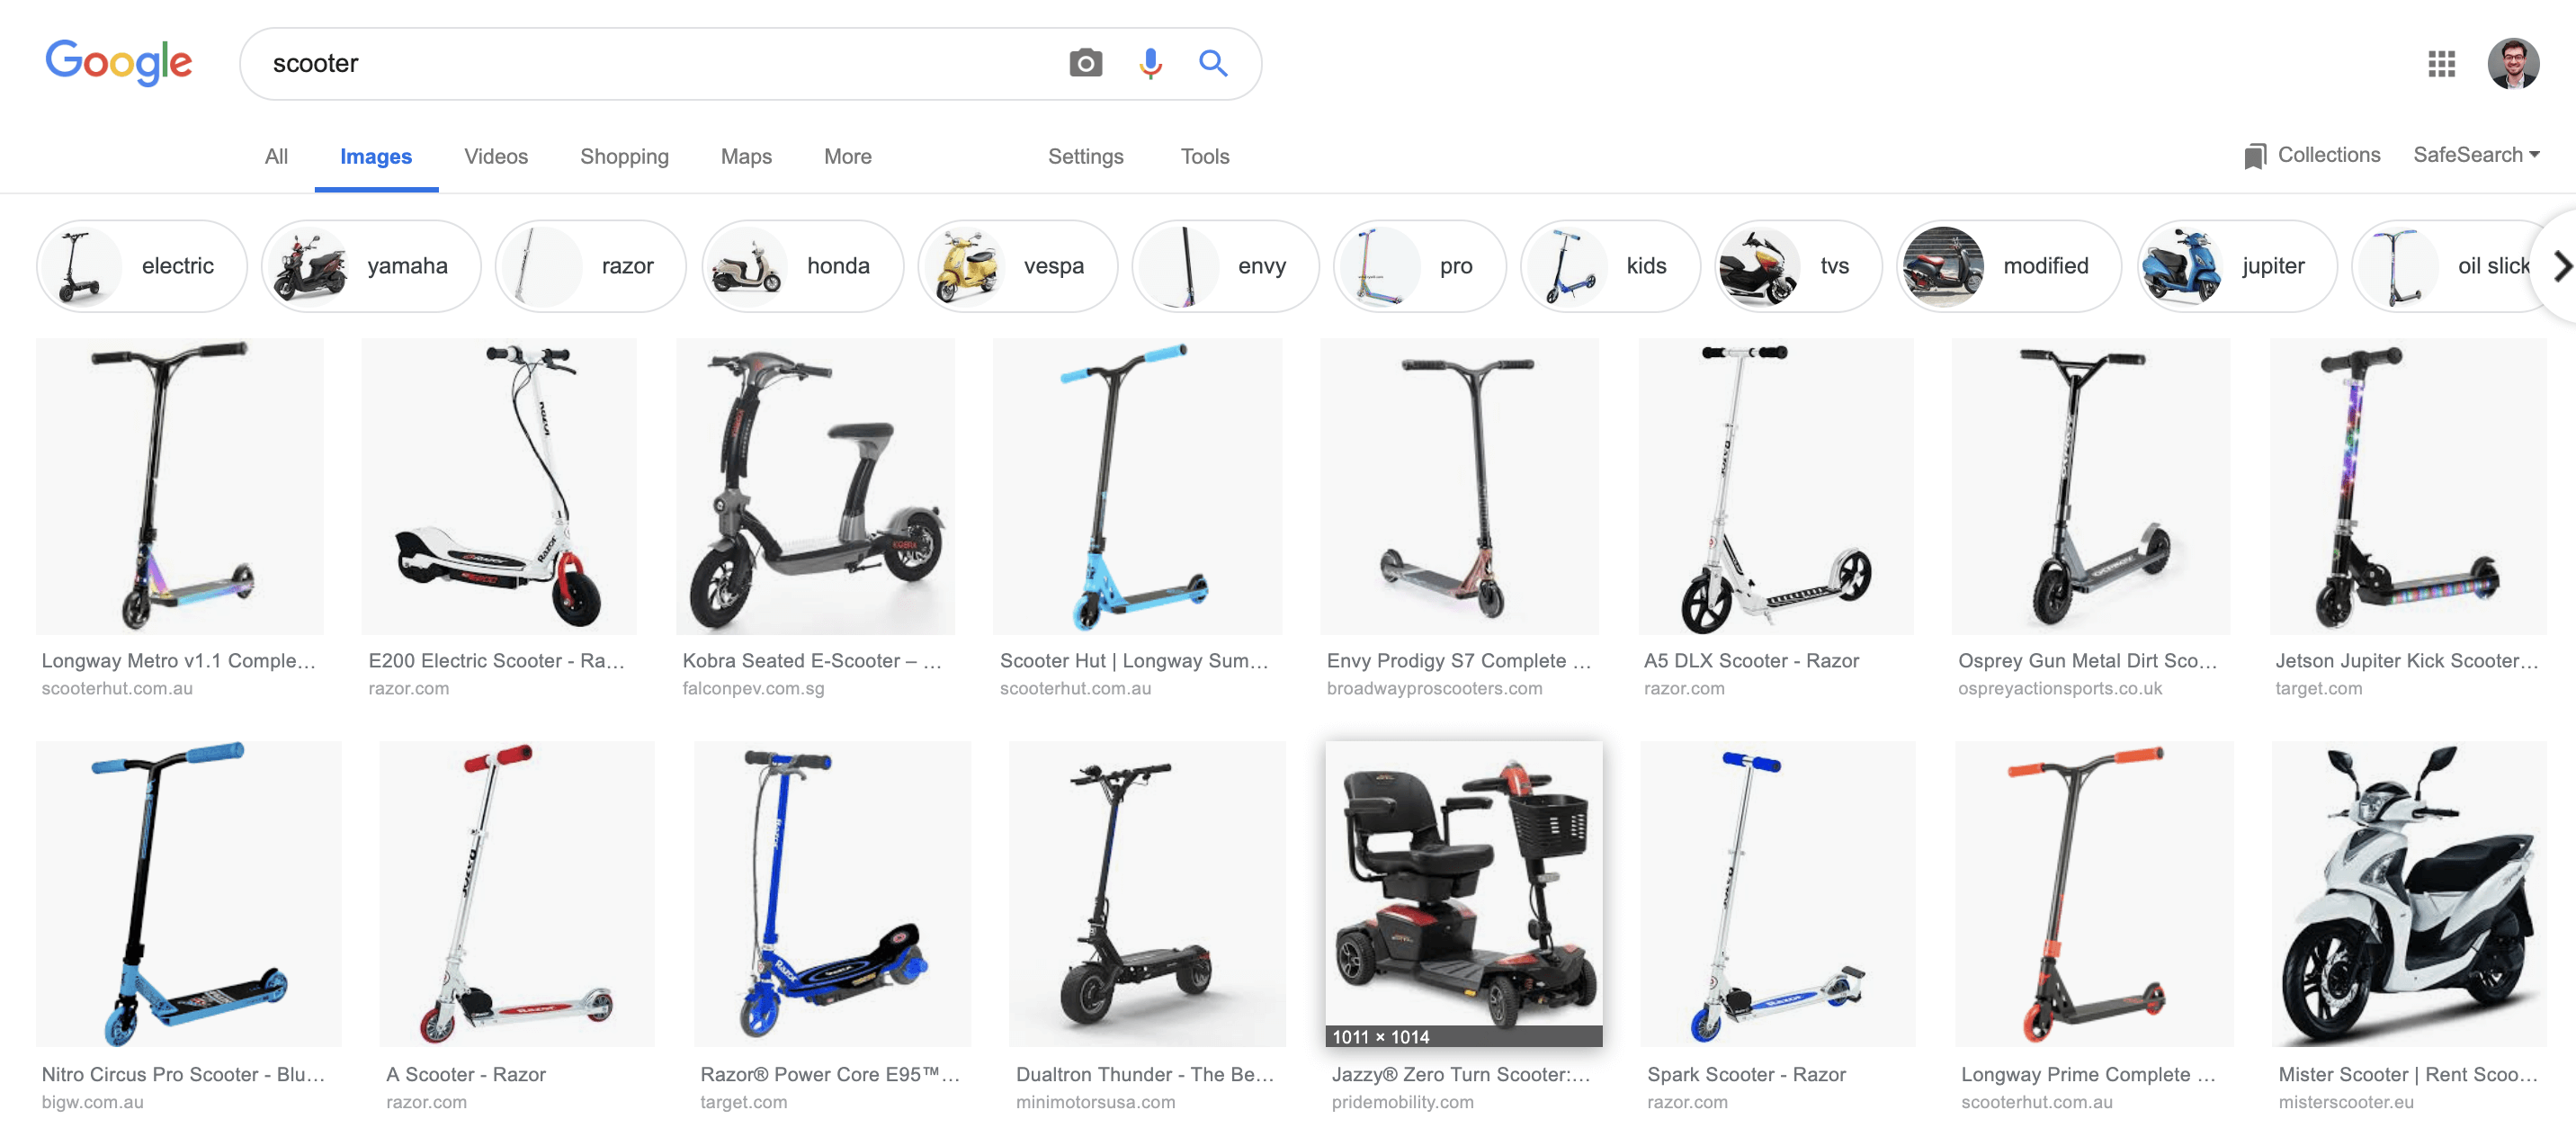 Lyon's love for electric scooters